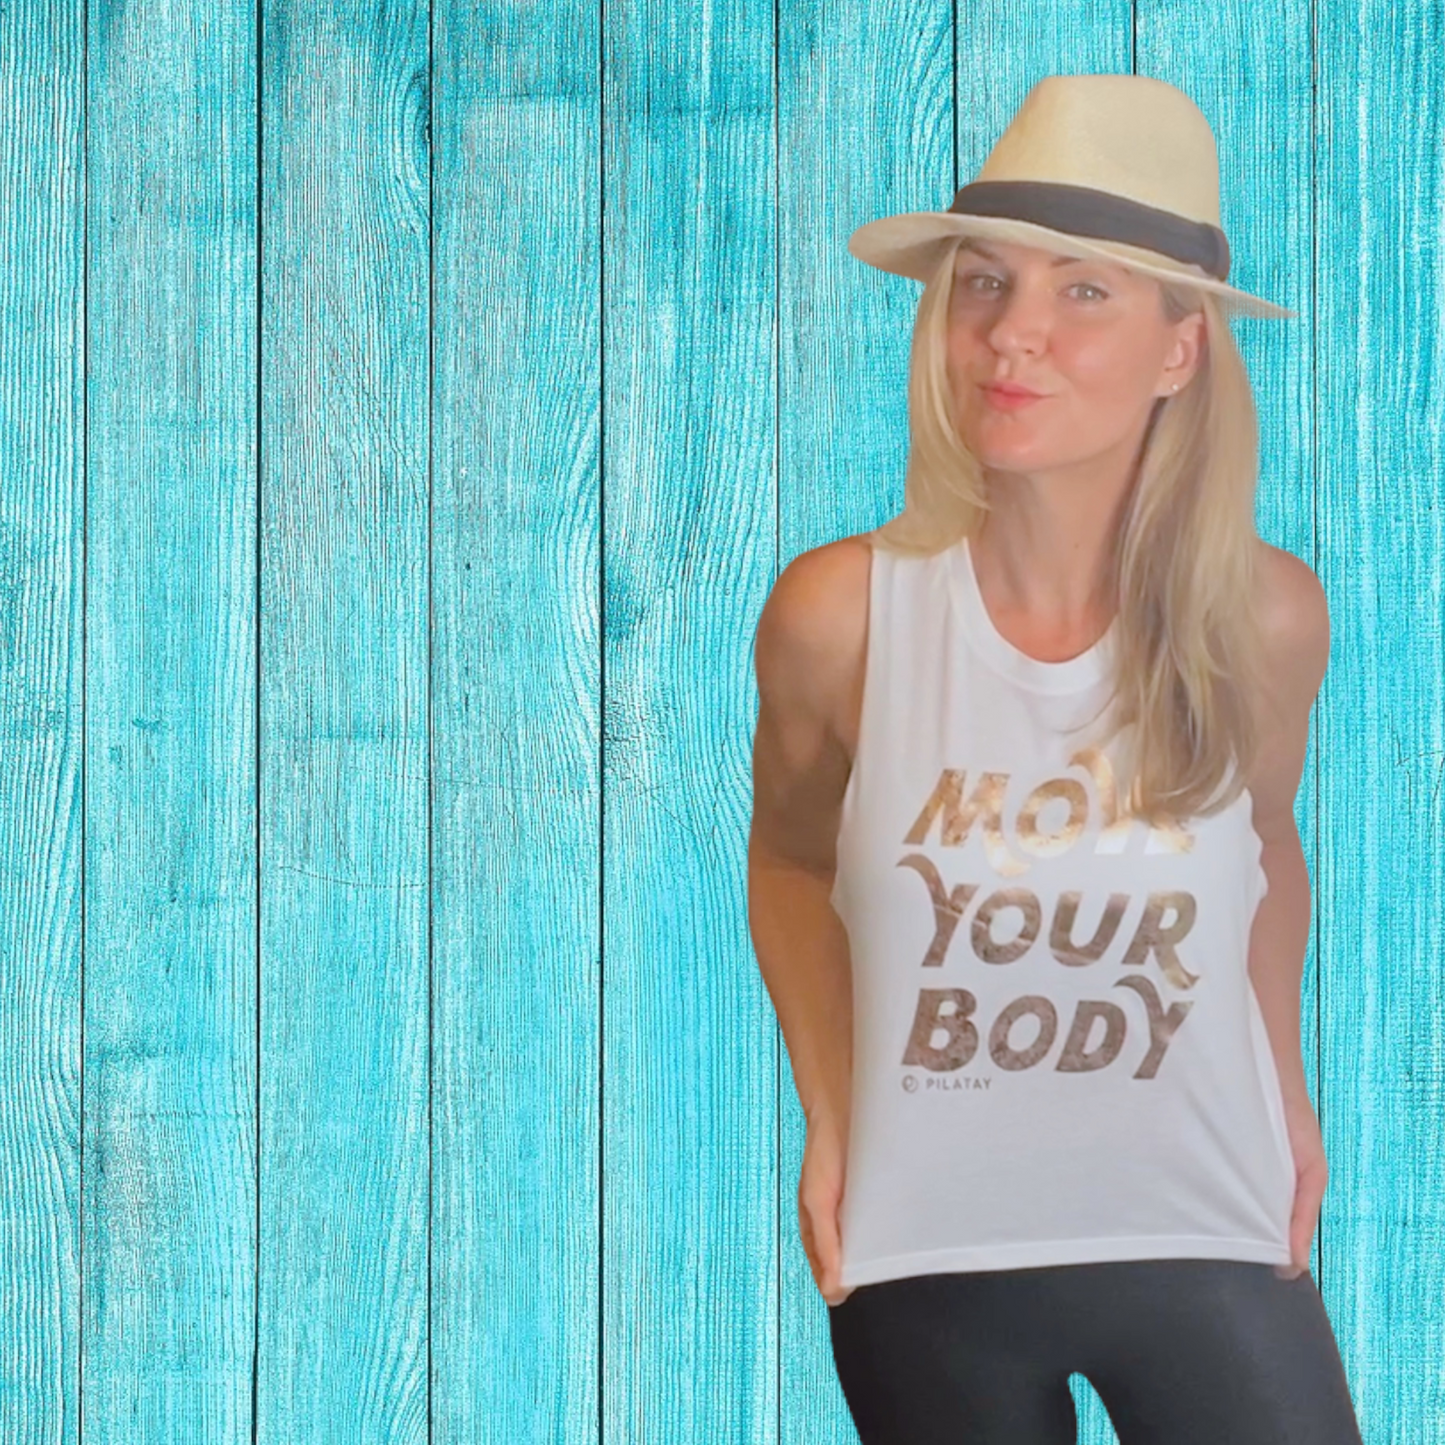 Pilates-Shirts-Move-Your-Body-Pilates-tank-top-by-Pilatay-Pilates-tanks-and-shirts-funny-pilates-shirts-gifts-for-pilates-teachers.png